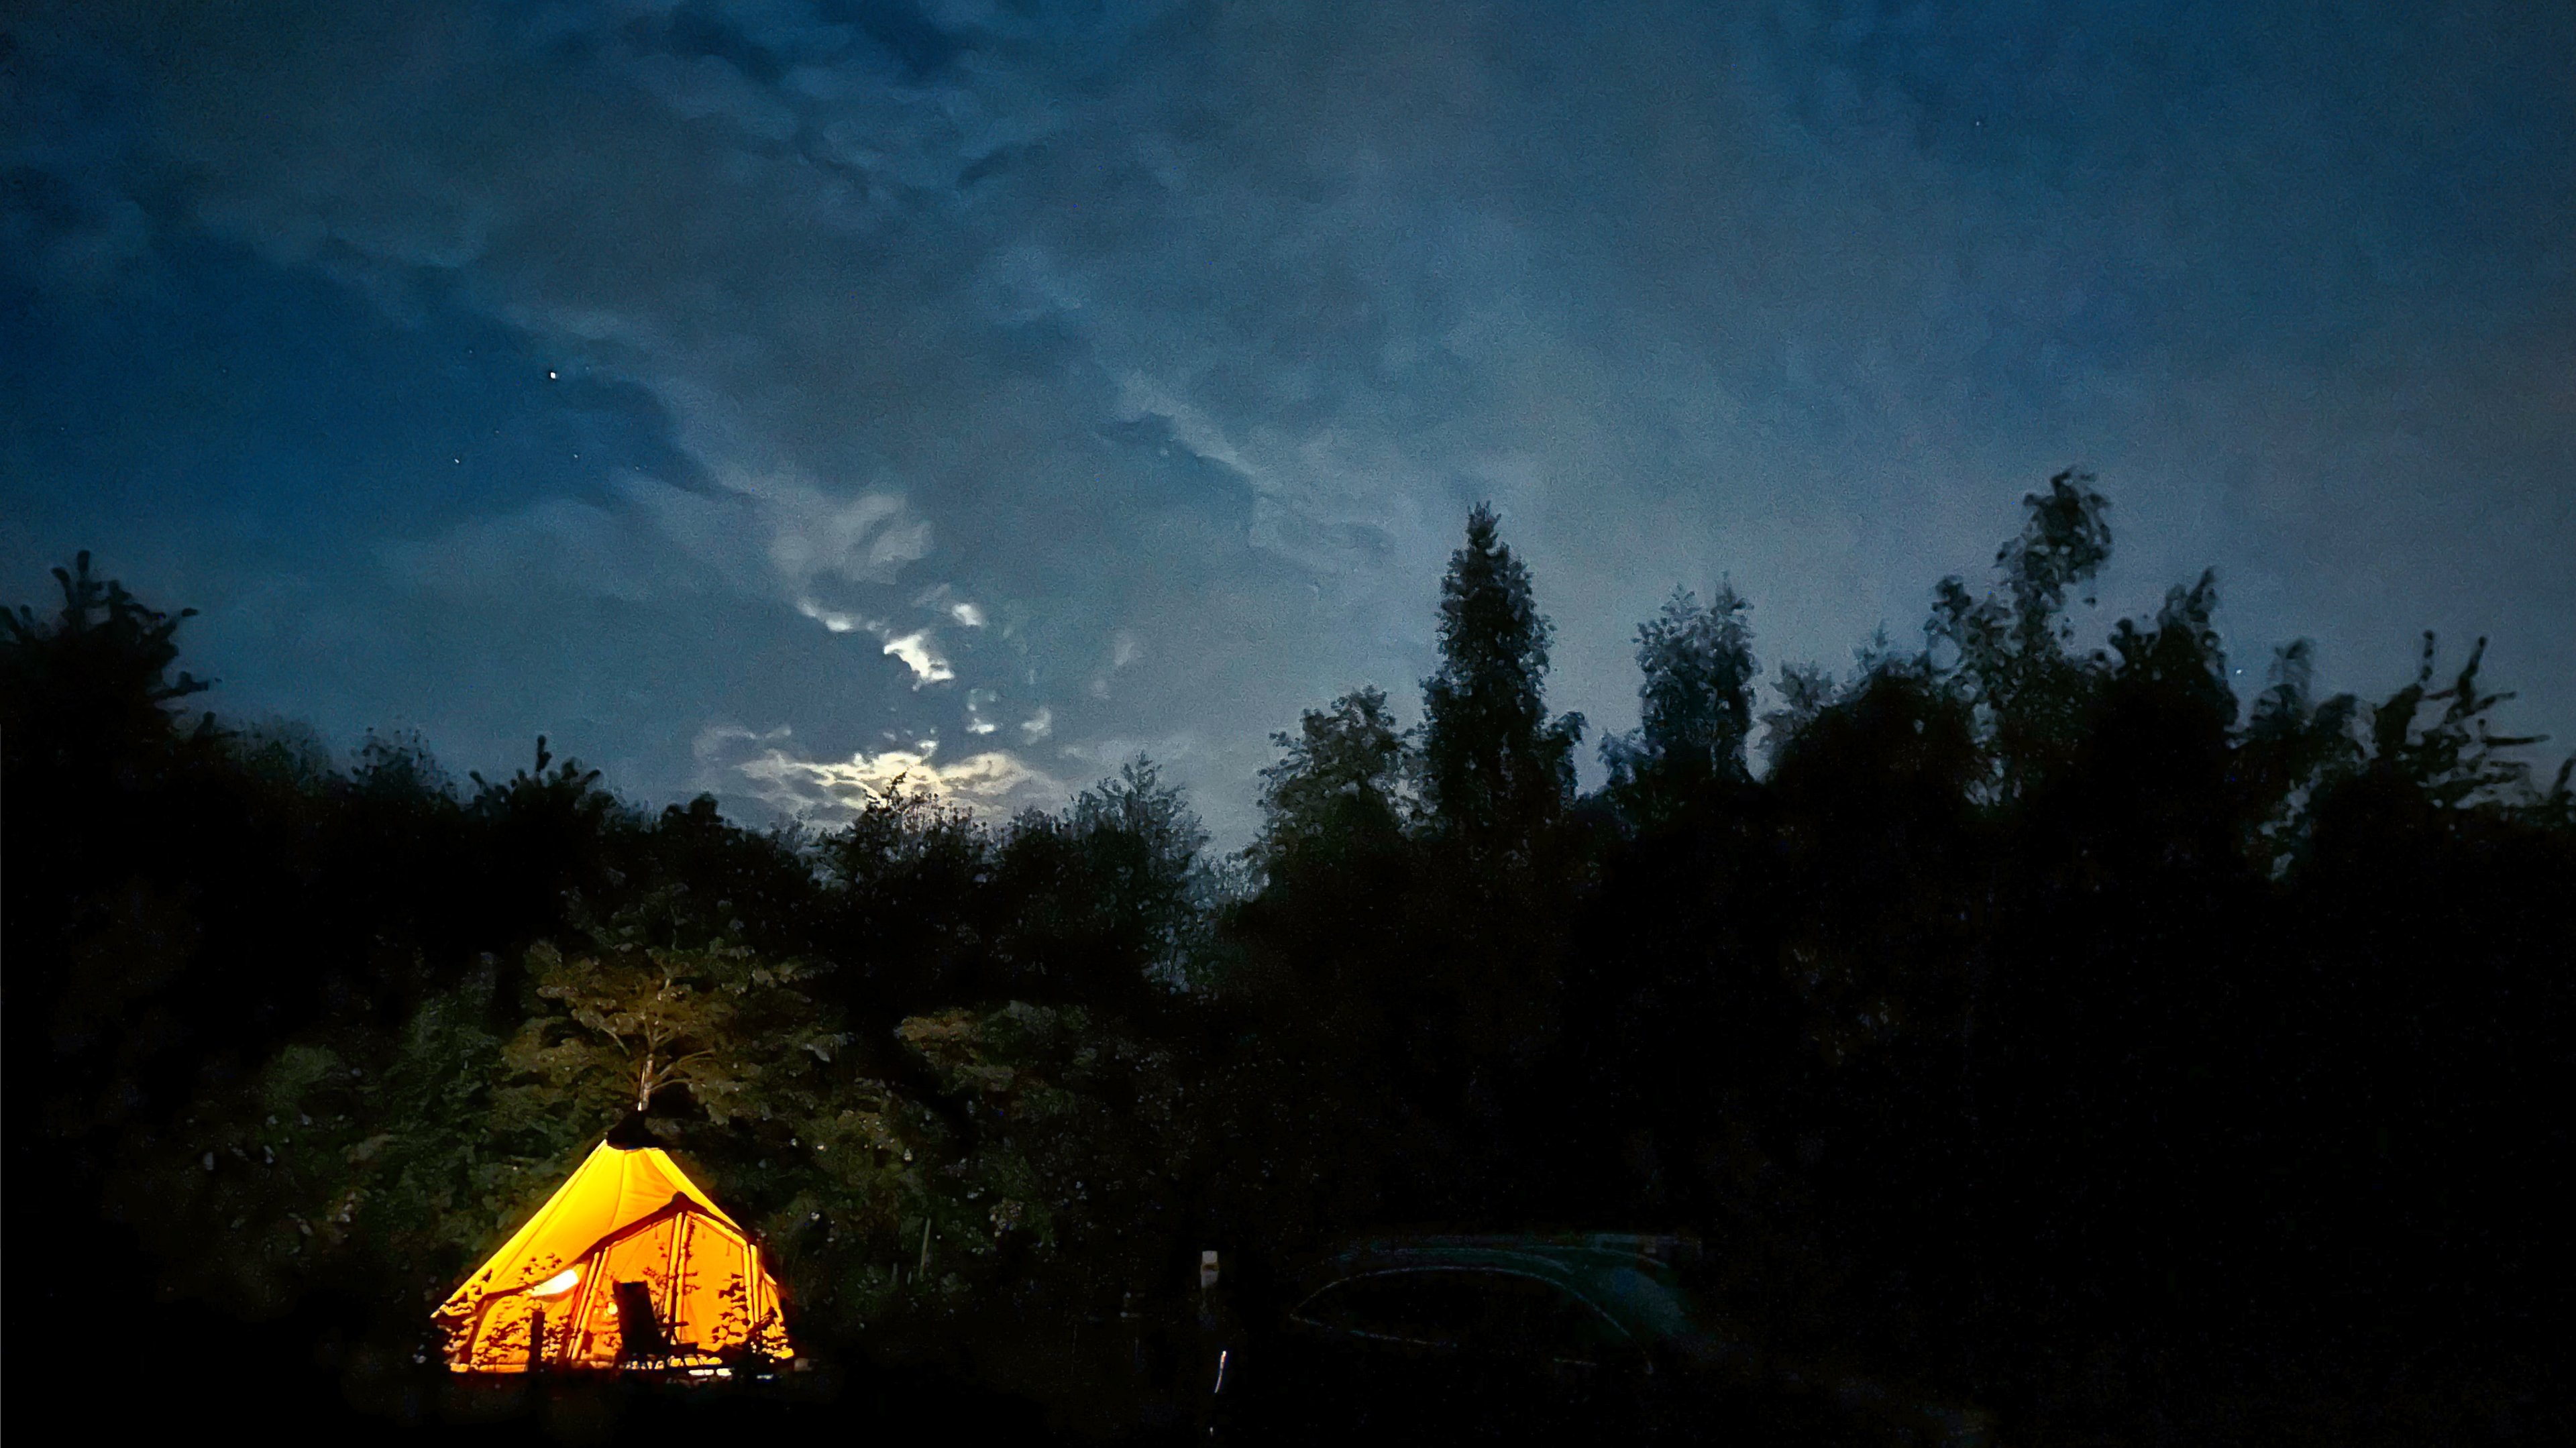 The tent lit up at night under the night's sky